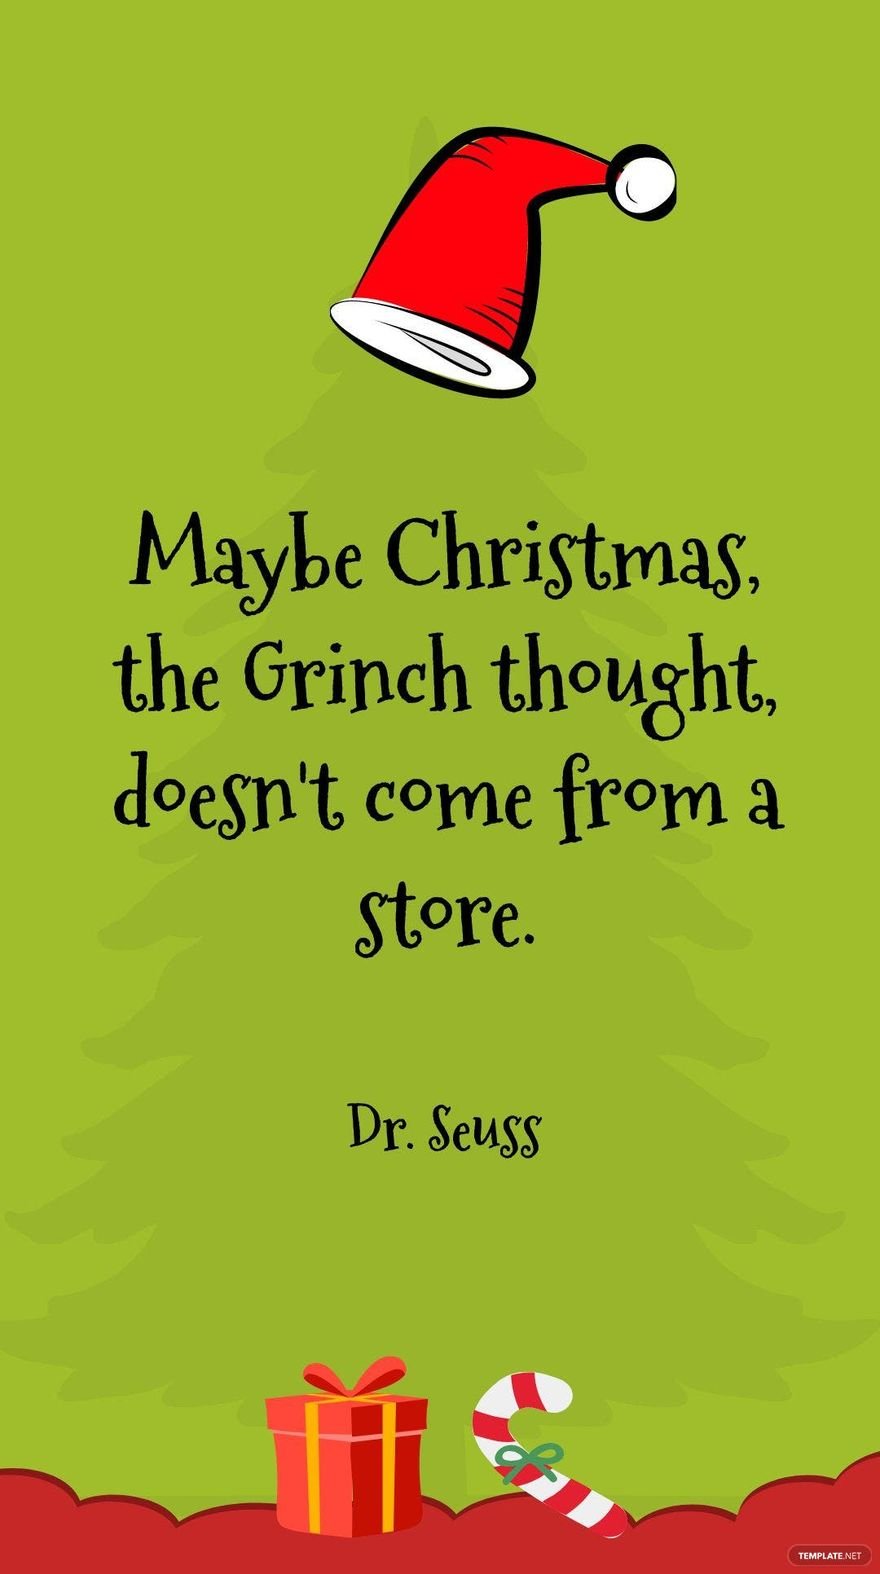 Dr. Seuss - Maybe Christmas, the Grinch thought, doesn't come from a store.